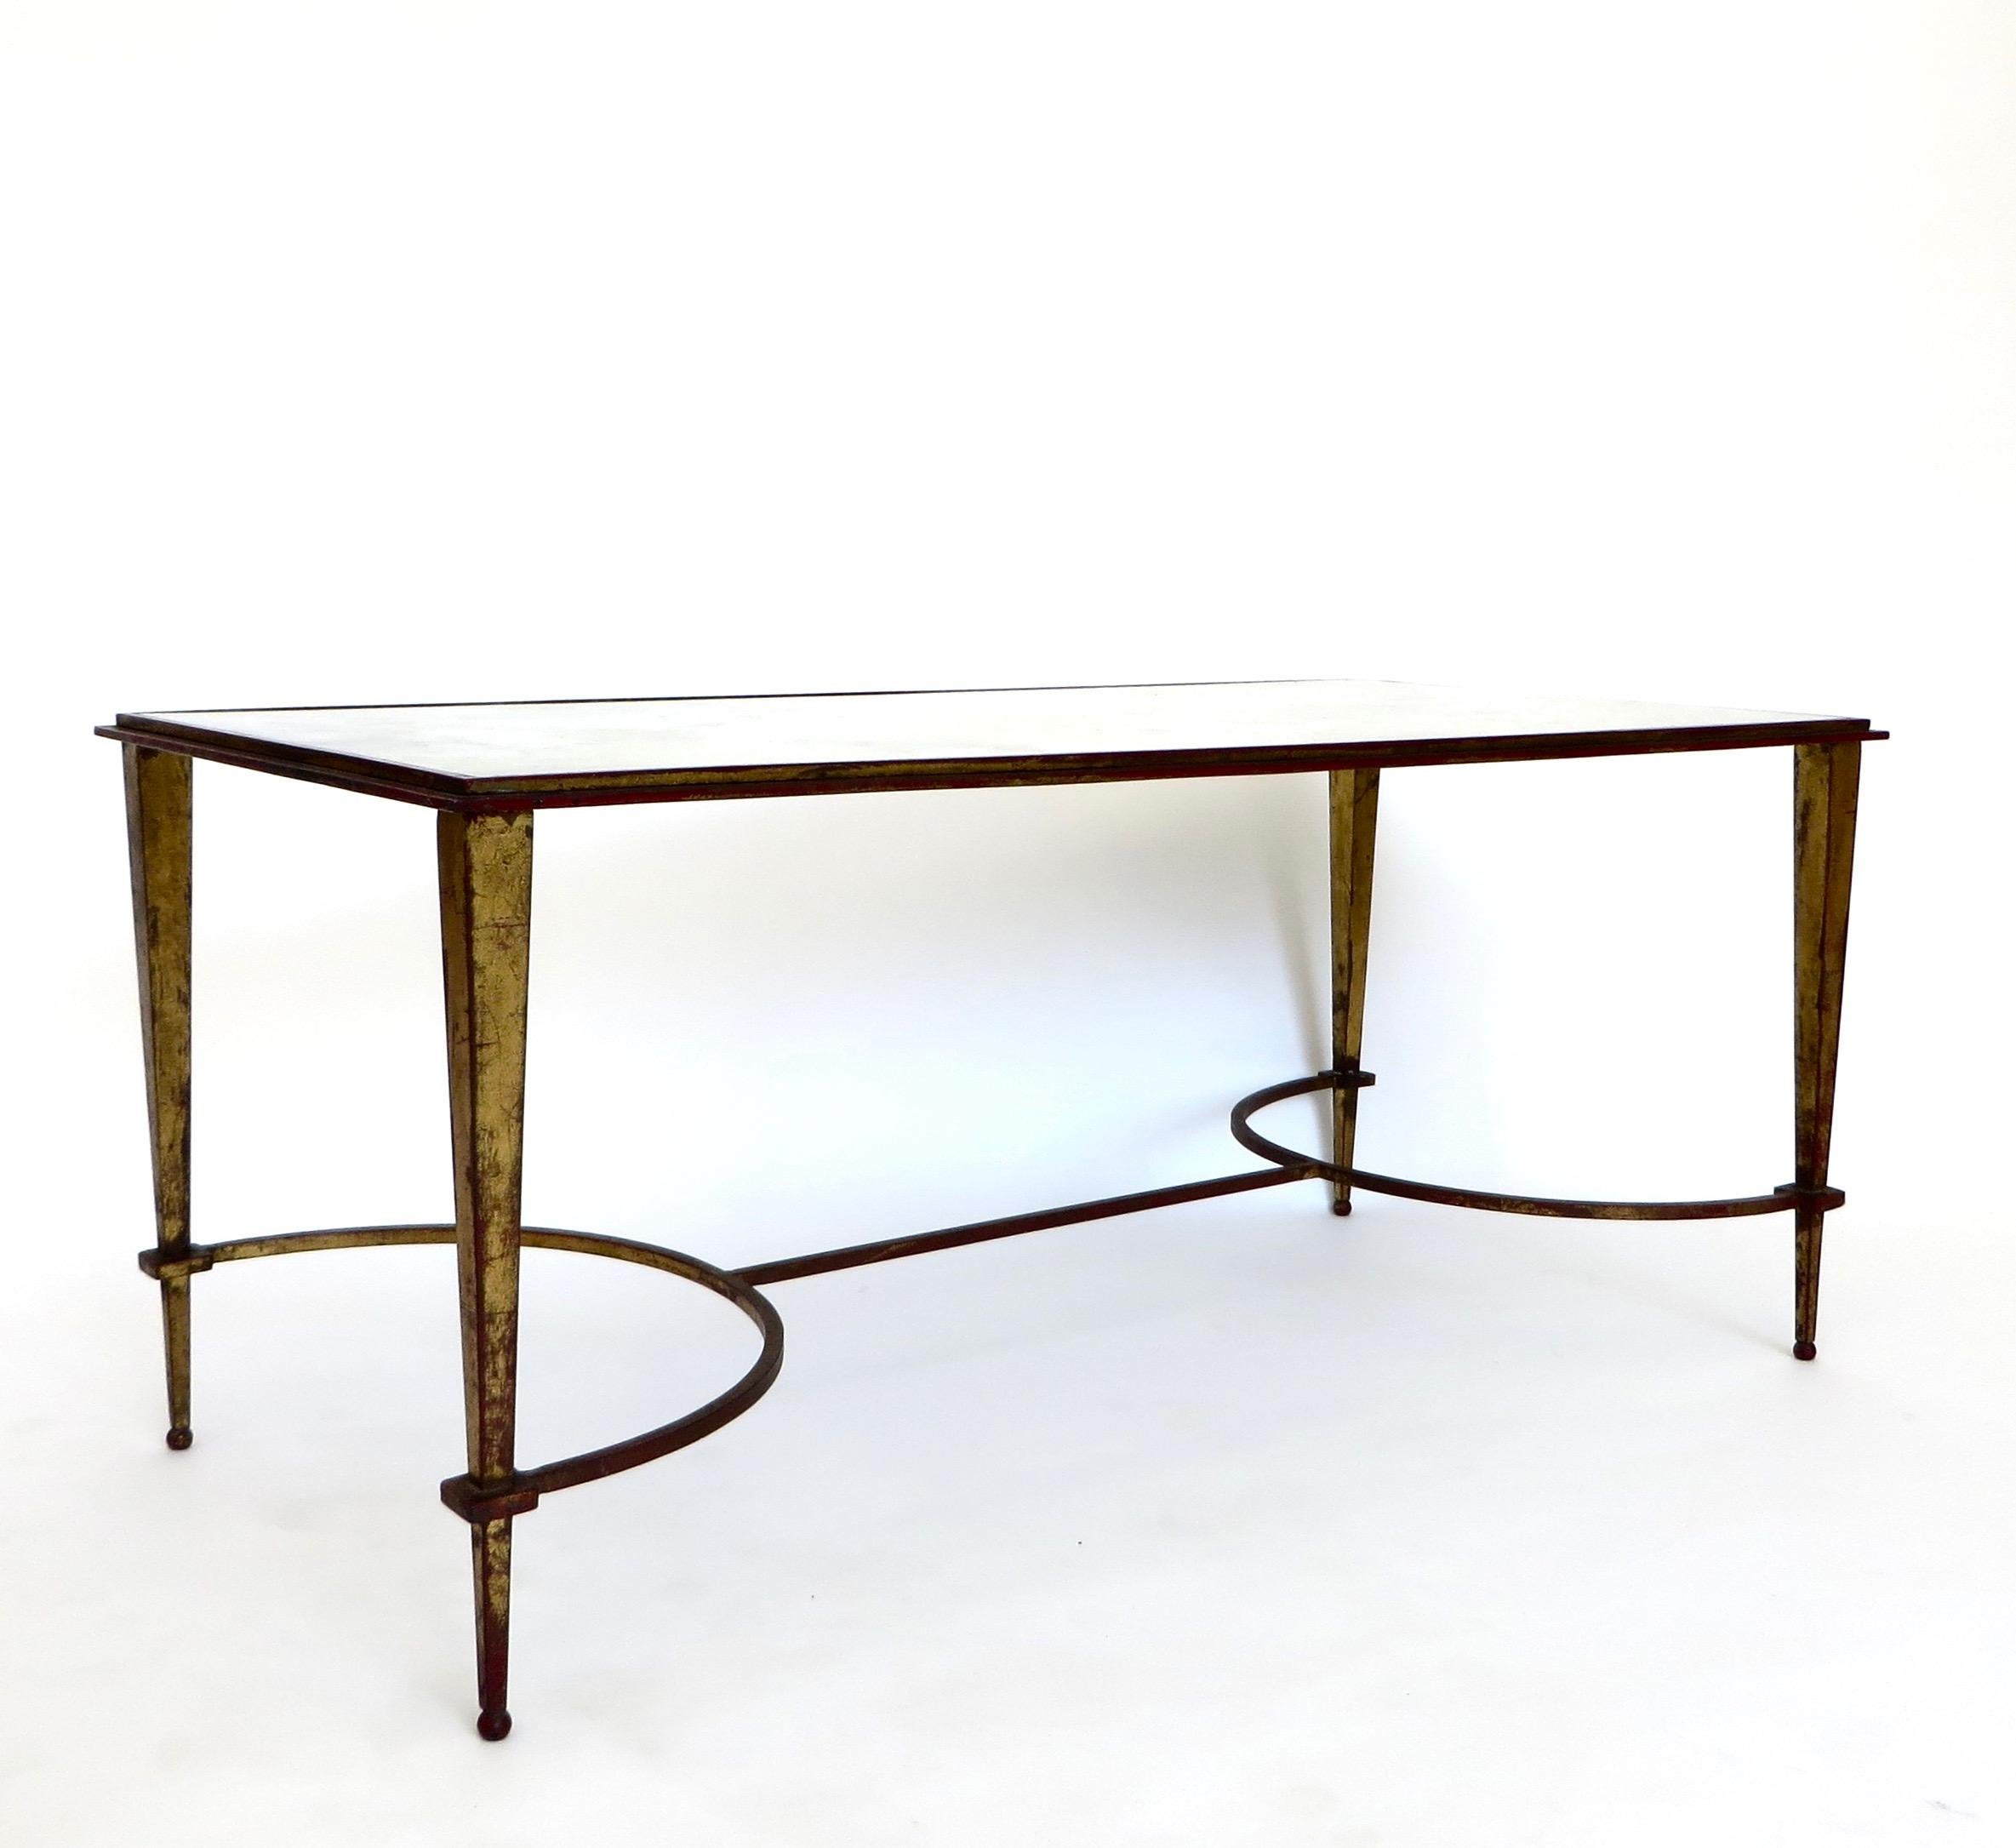 Maison Ramsay patinated gilded iron base with mirrored glass top.
The gilded legs have a tapered shape and are connected by a thin stretcher. 
The mirrored glass plateau top is in beautiful condition with cloud like verre eglomise or gold mirroring,